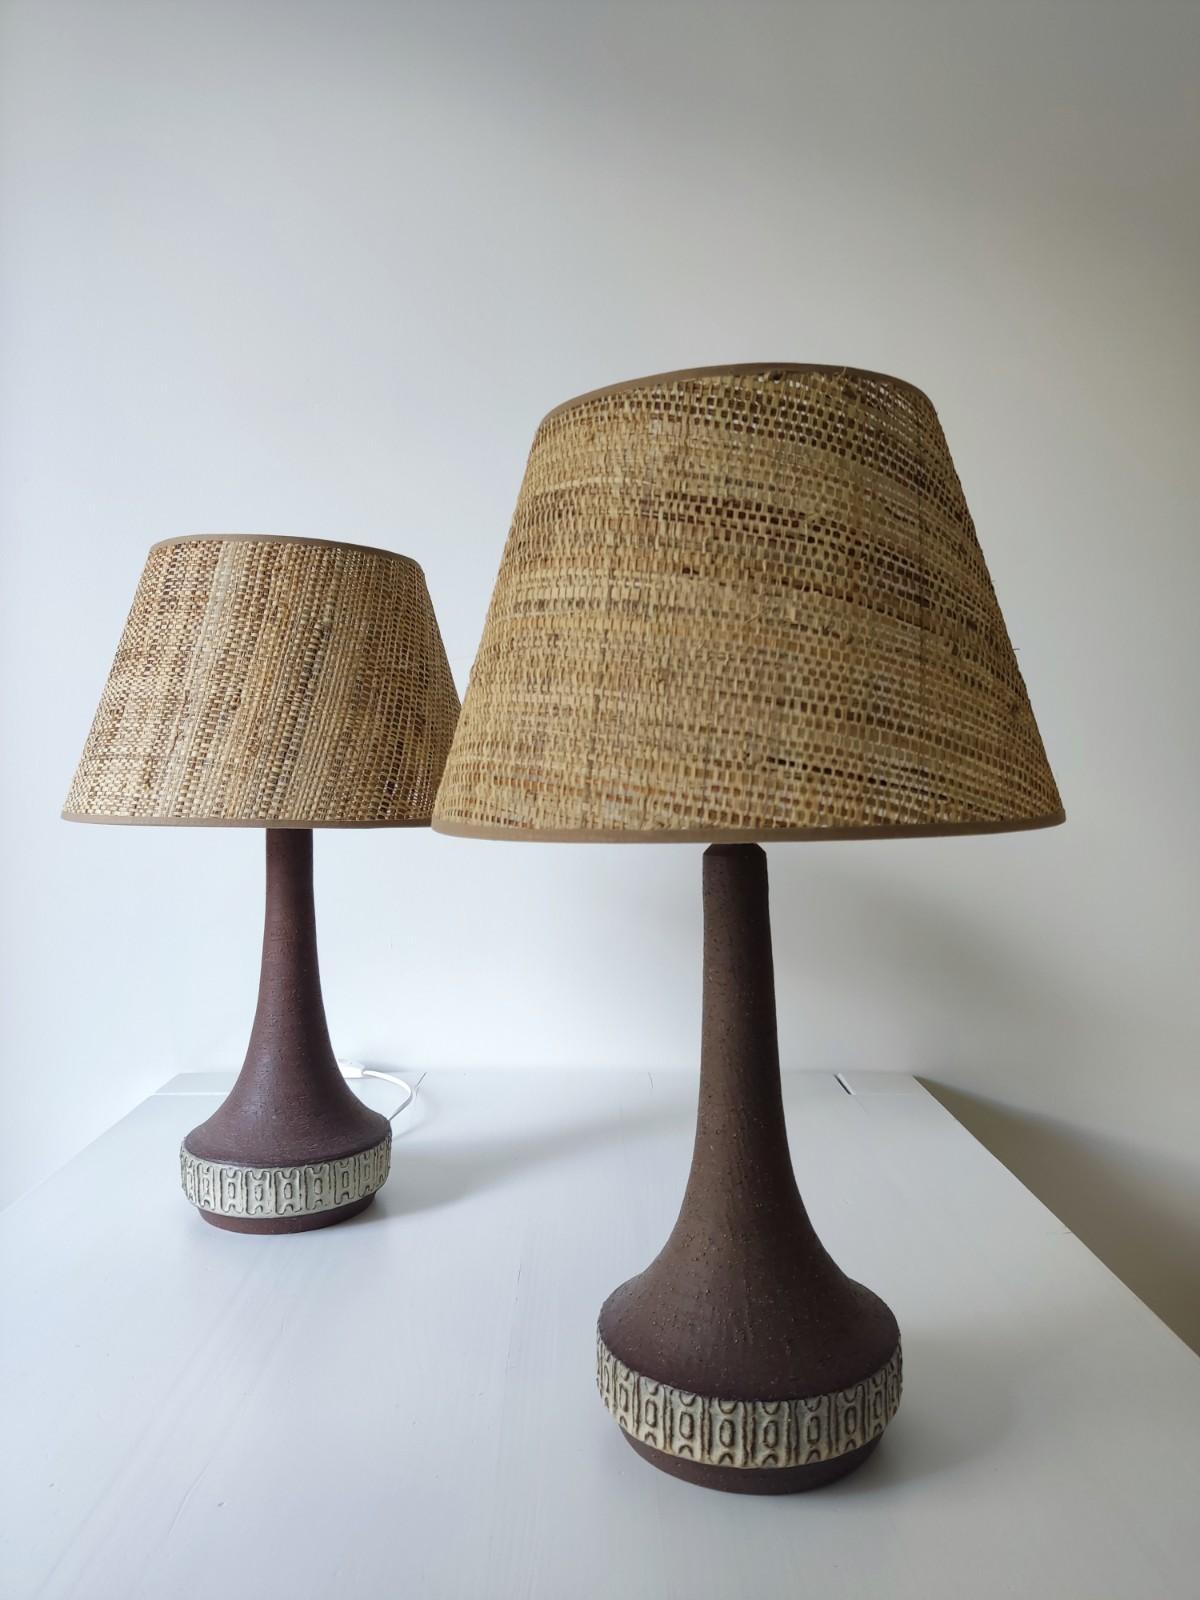 Rare Danish table lamp Michael Andersen by Helge Bjufstrom, 1960s
the natural raffia lampshade is new as well as the electricity.
Nice warm light.
Numbered under the foot.